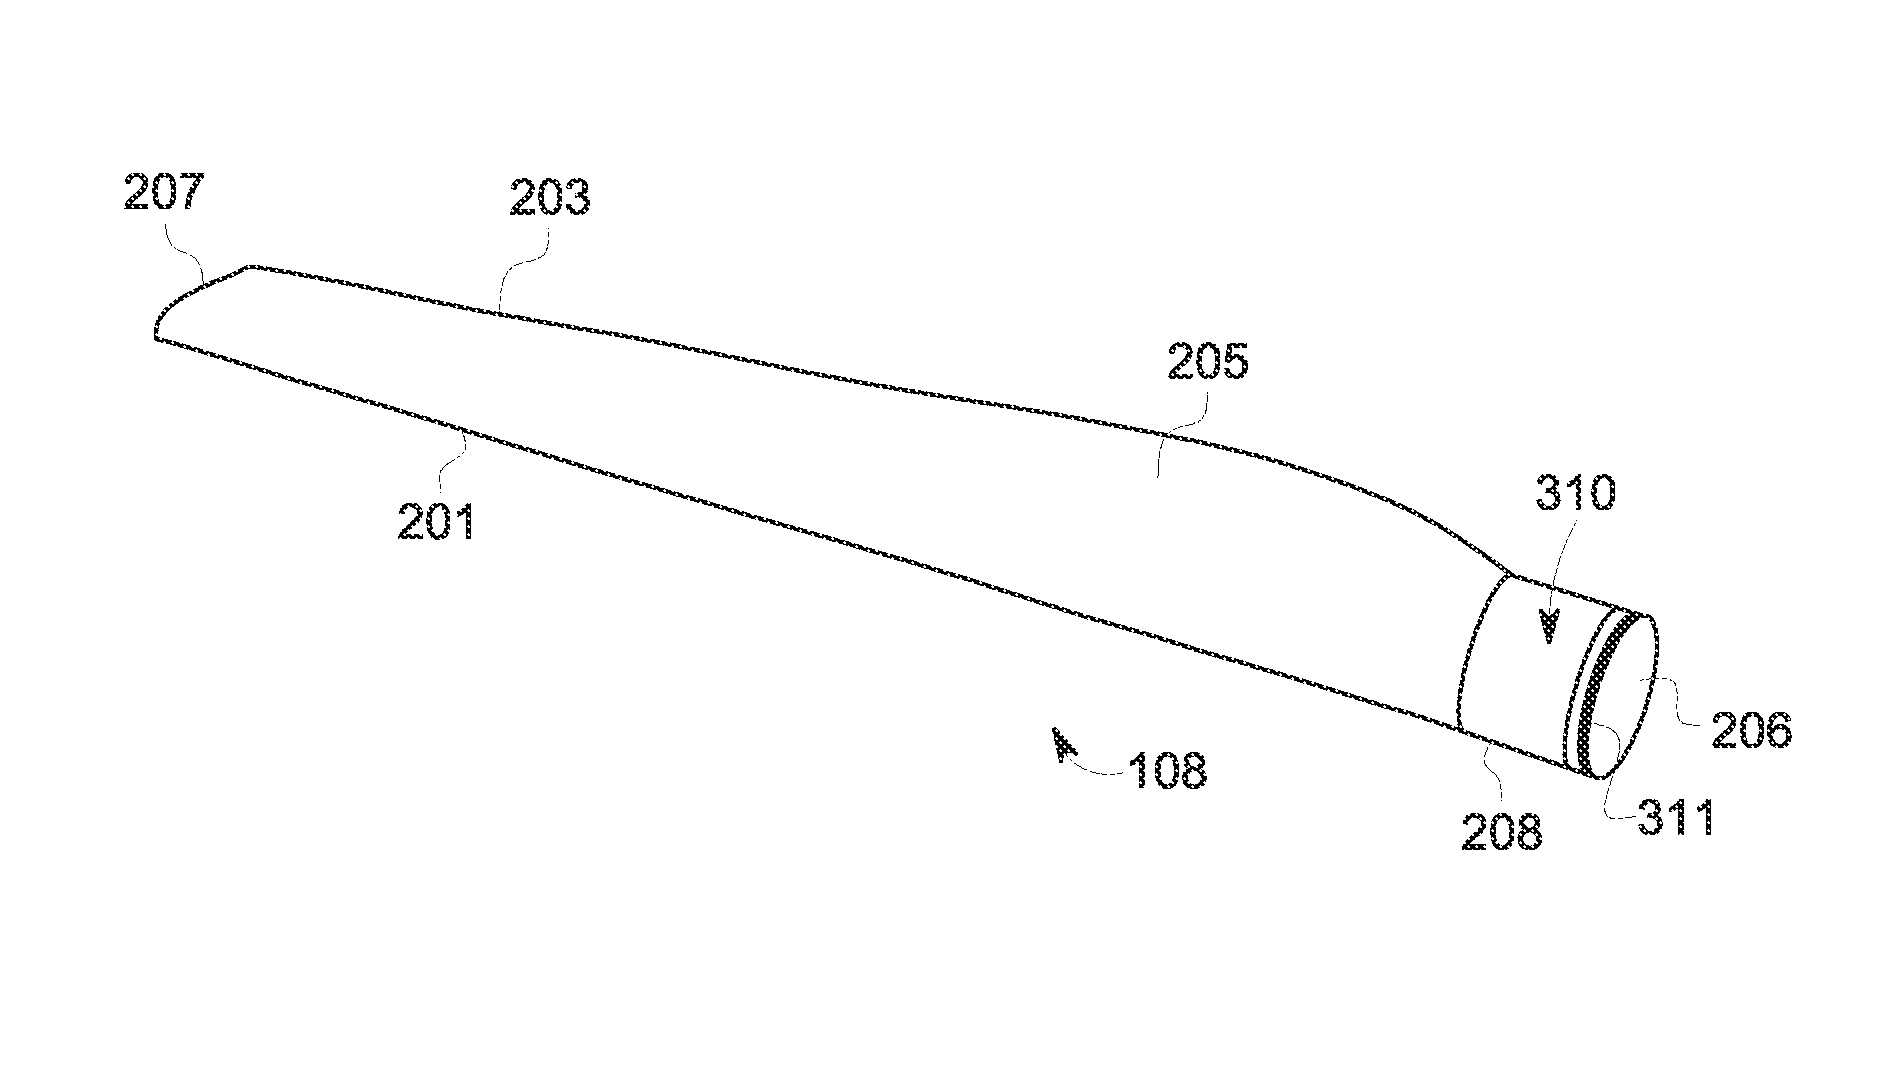 Root assemblies with external structural connection supports for rotor blades